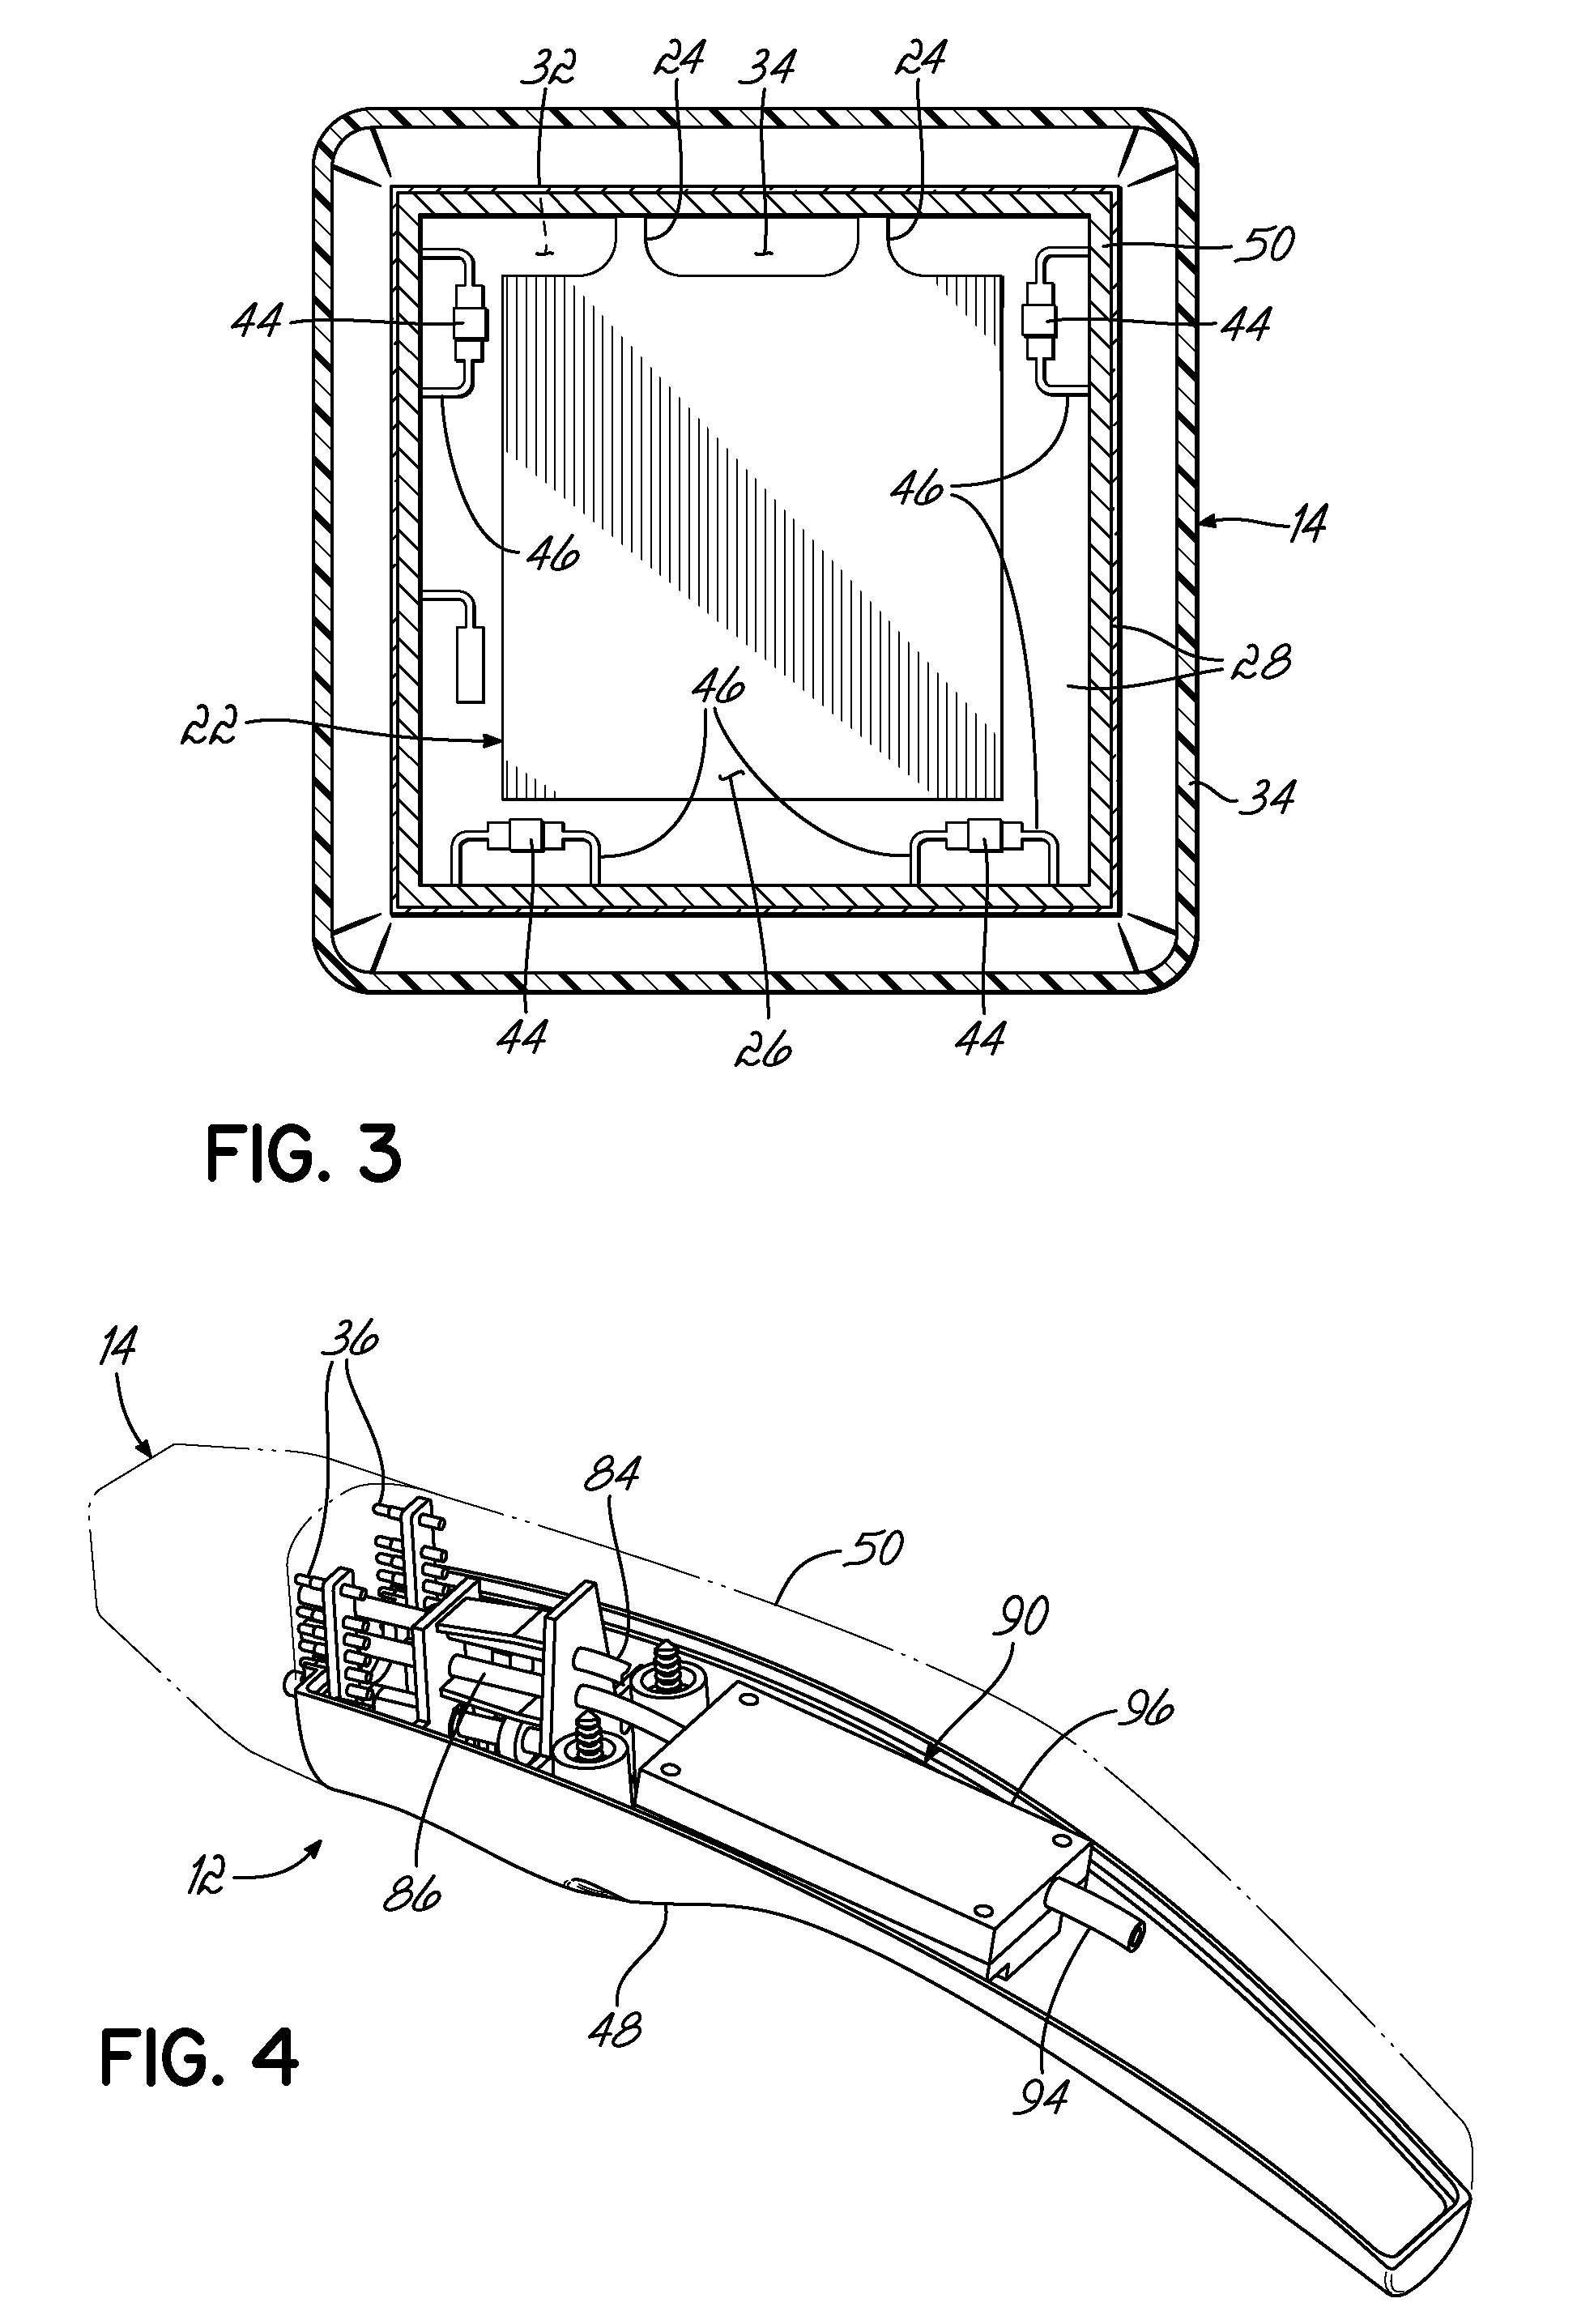 Apparatus and methods for cooling a treatment apparatus configured to non-invasively deliver electromagnetic energy to a patient's tissue